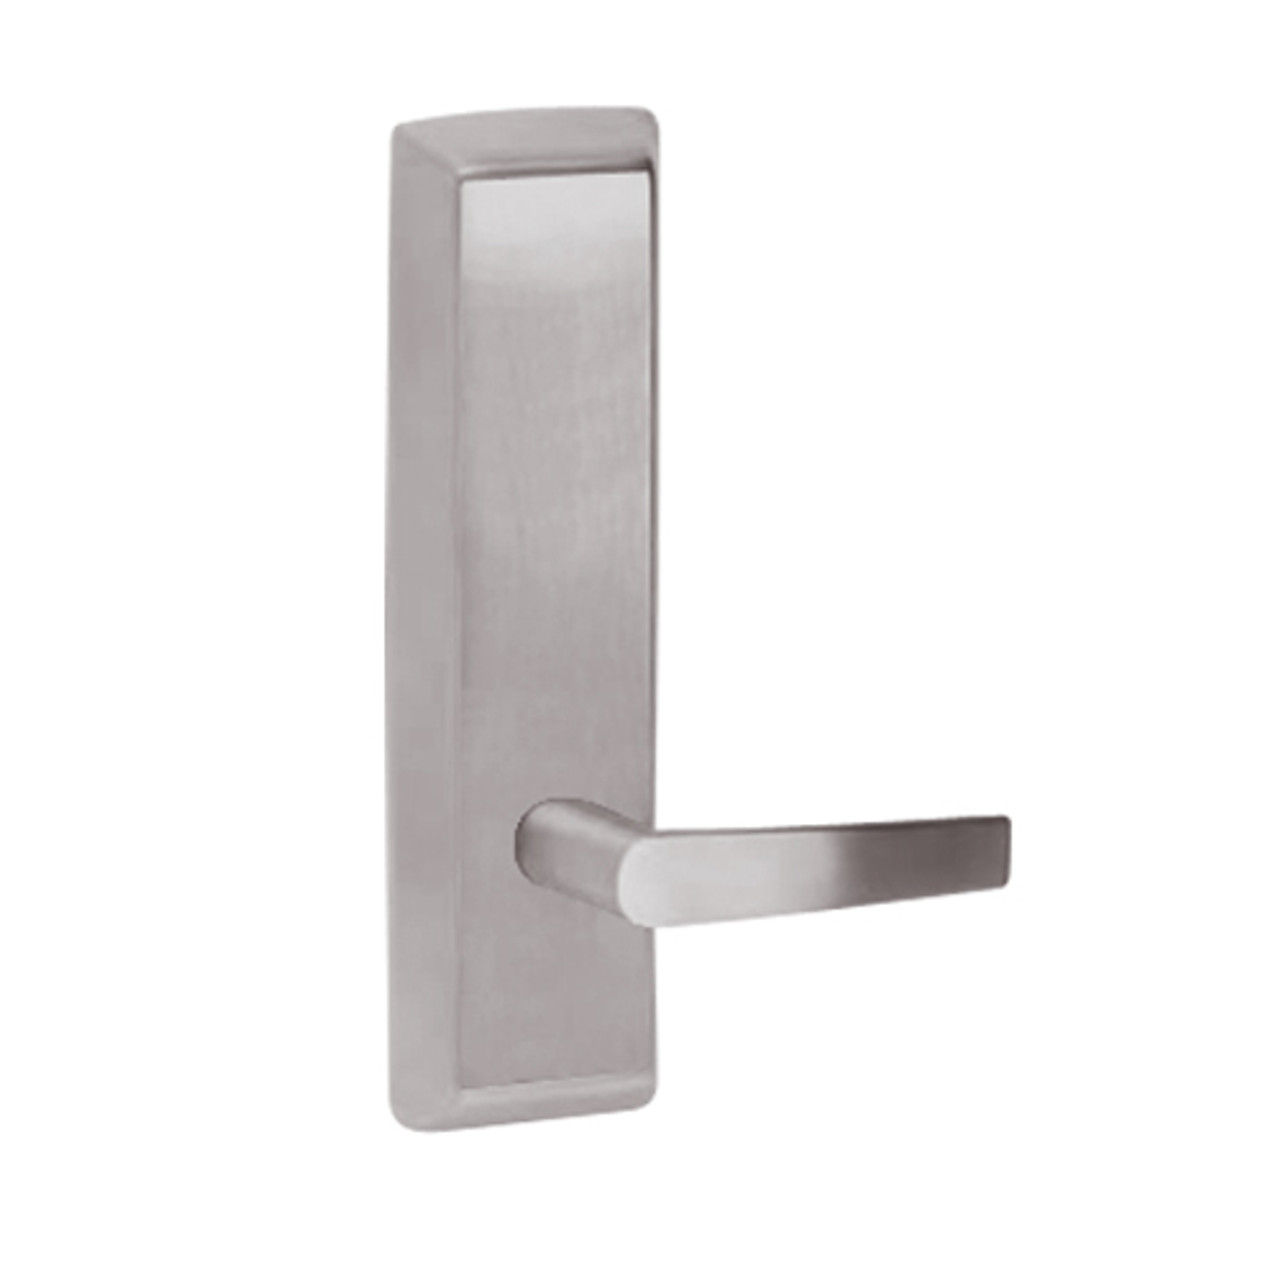 A957-630-RHR Corbin ED5000 Series Exit Device Trim with Nightlatch Armstrong Lever in Satin Stainless Steel Finish